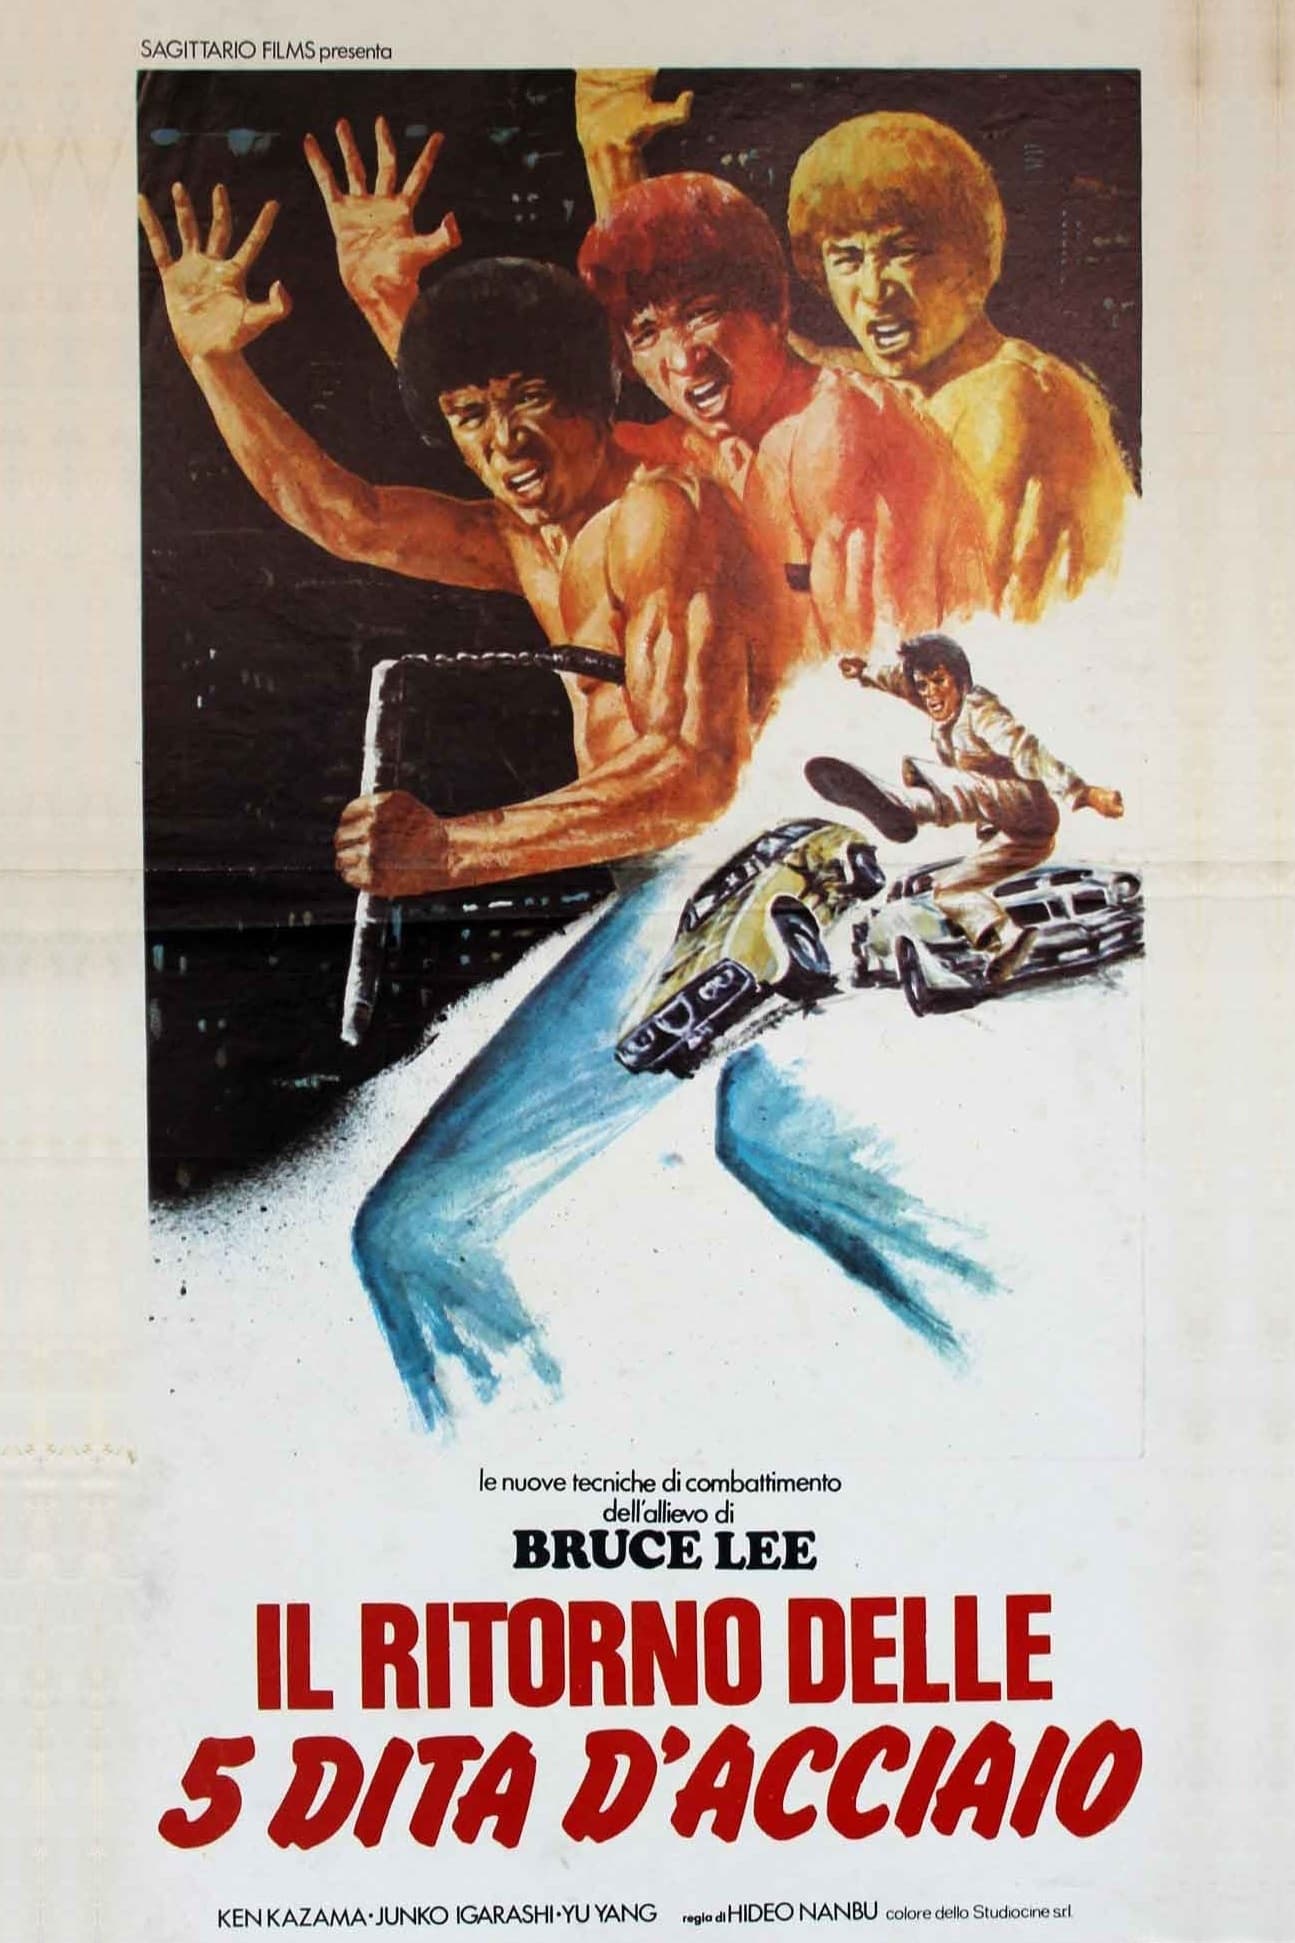 Karate from Shaolin Temple (1976)